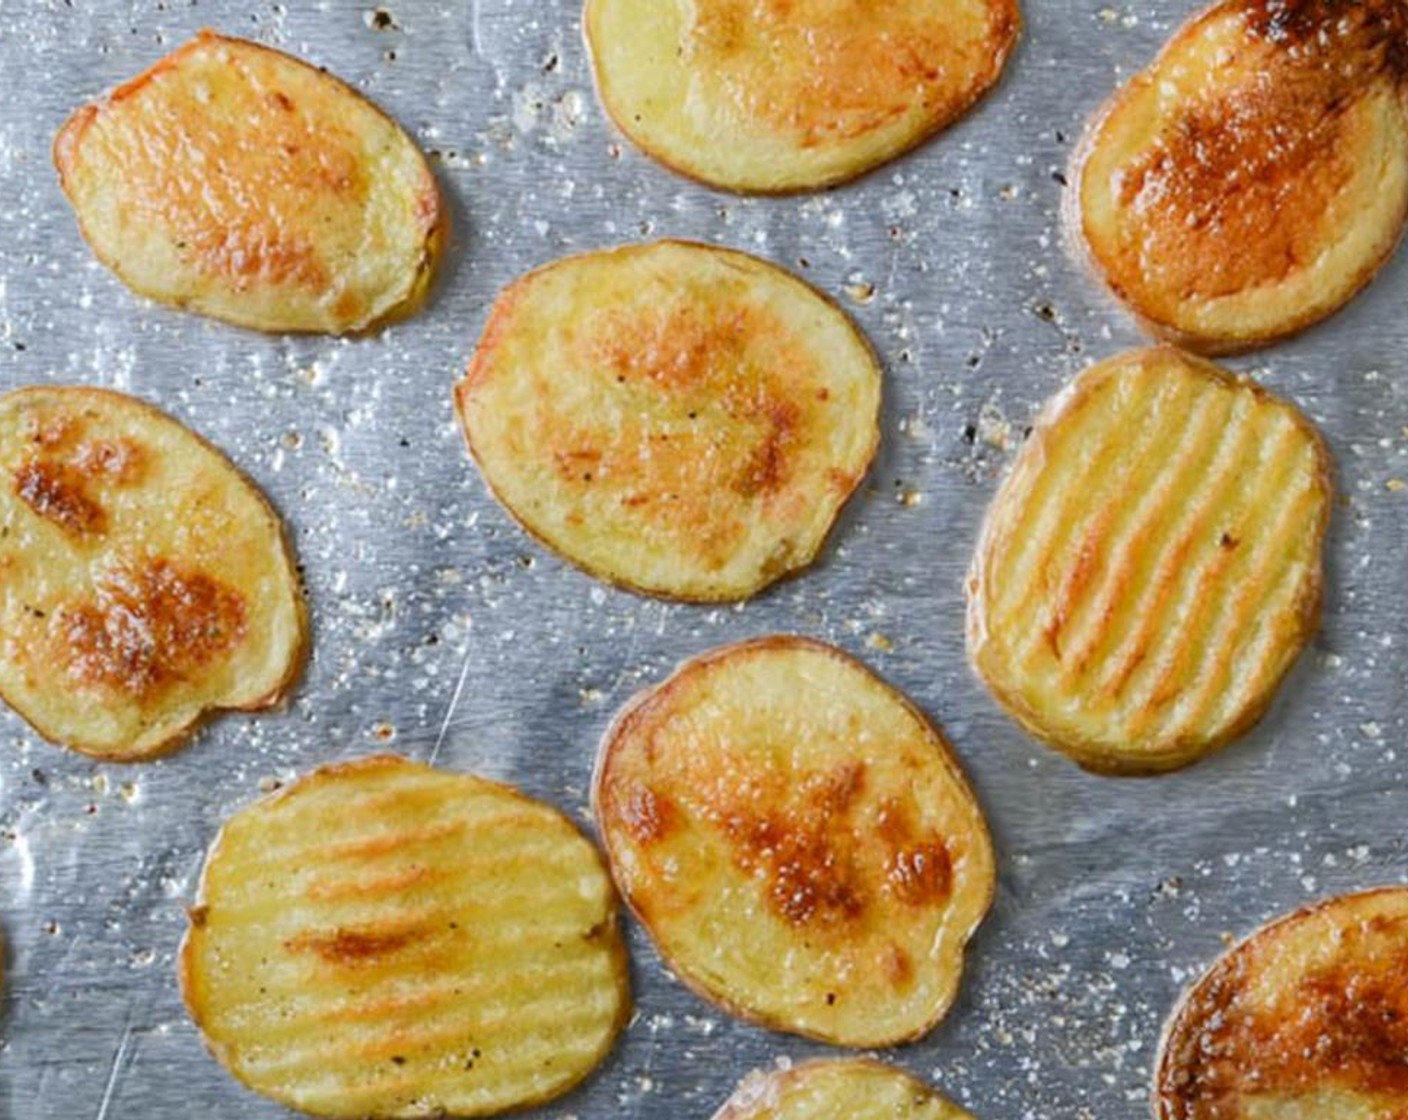 step 5 Remove from oven and flip potatoes over. Return the baking sheet to the oven and cook for an additional 10-12 minutes or until potatoes are golden and crisp. Remove from oven and set aside.